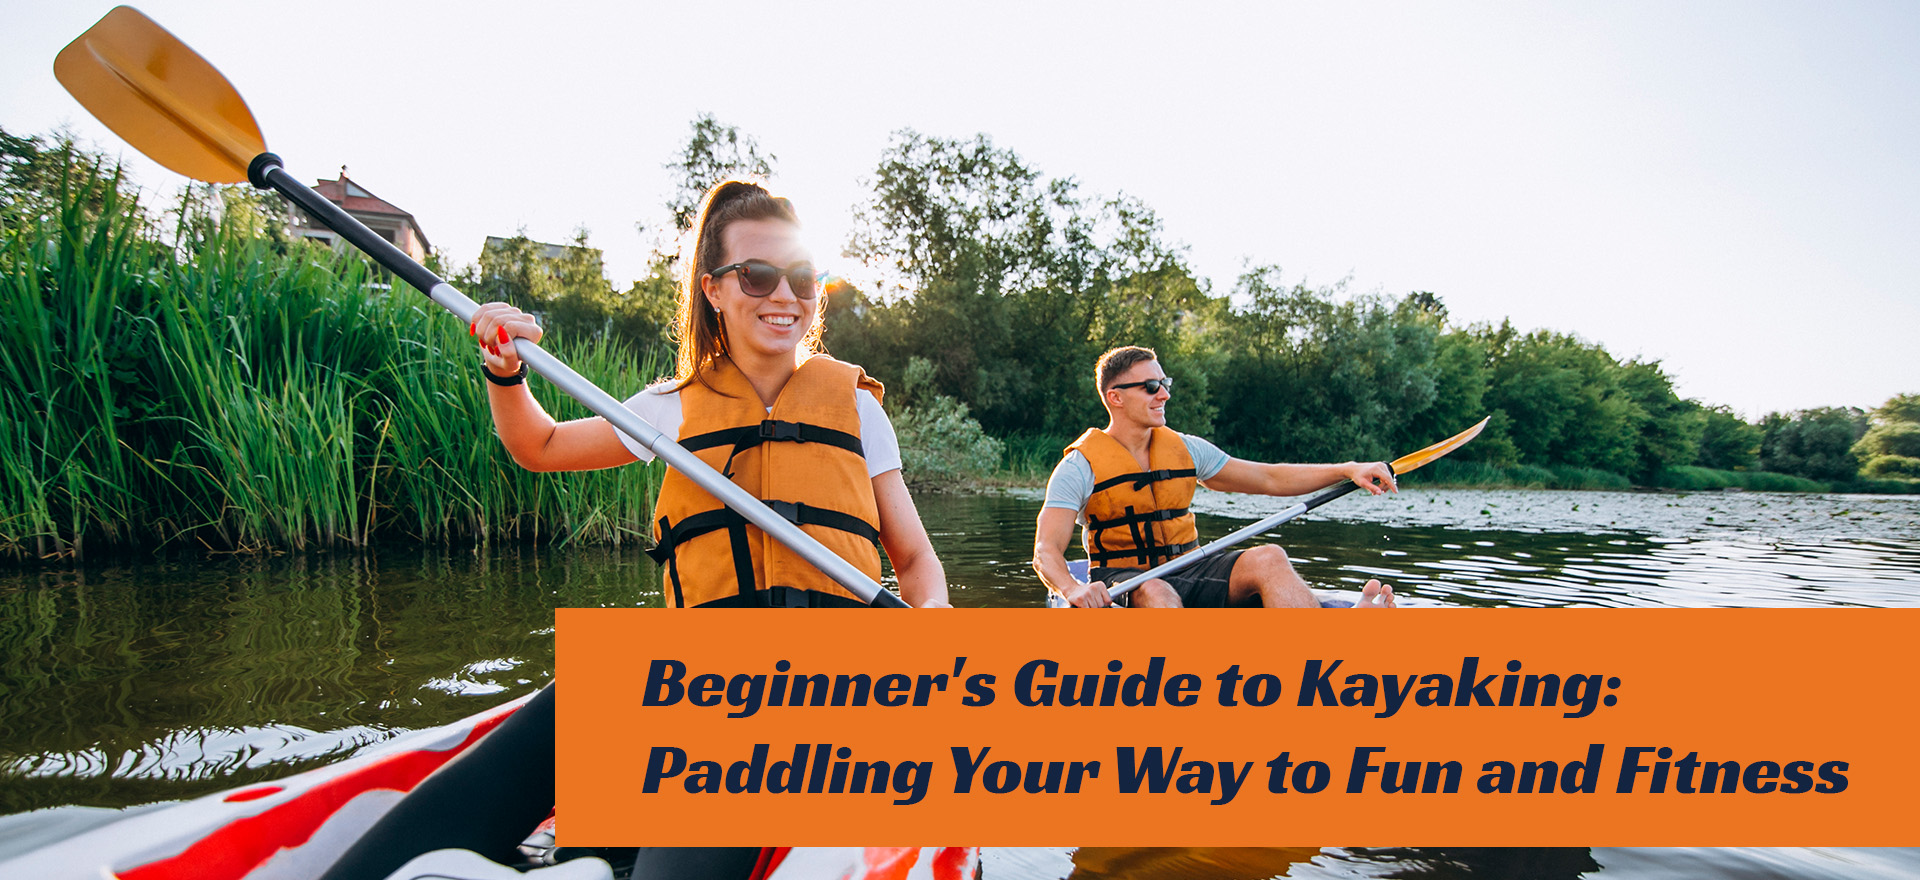 Beginner_s Guide To Kayaking Paddling Your Way To Fun And Fitness 2